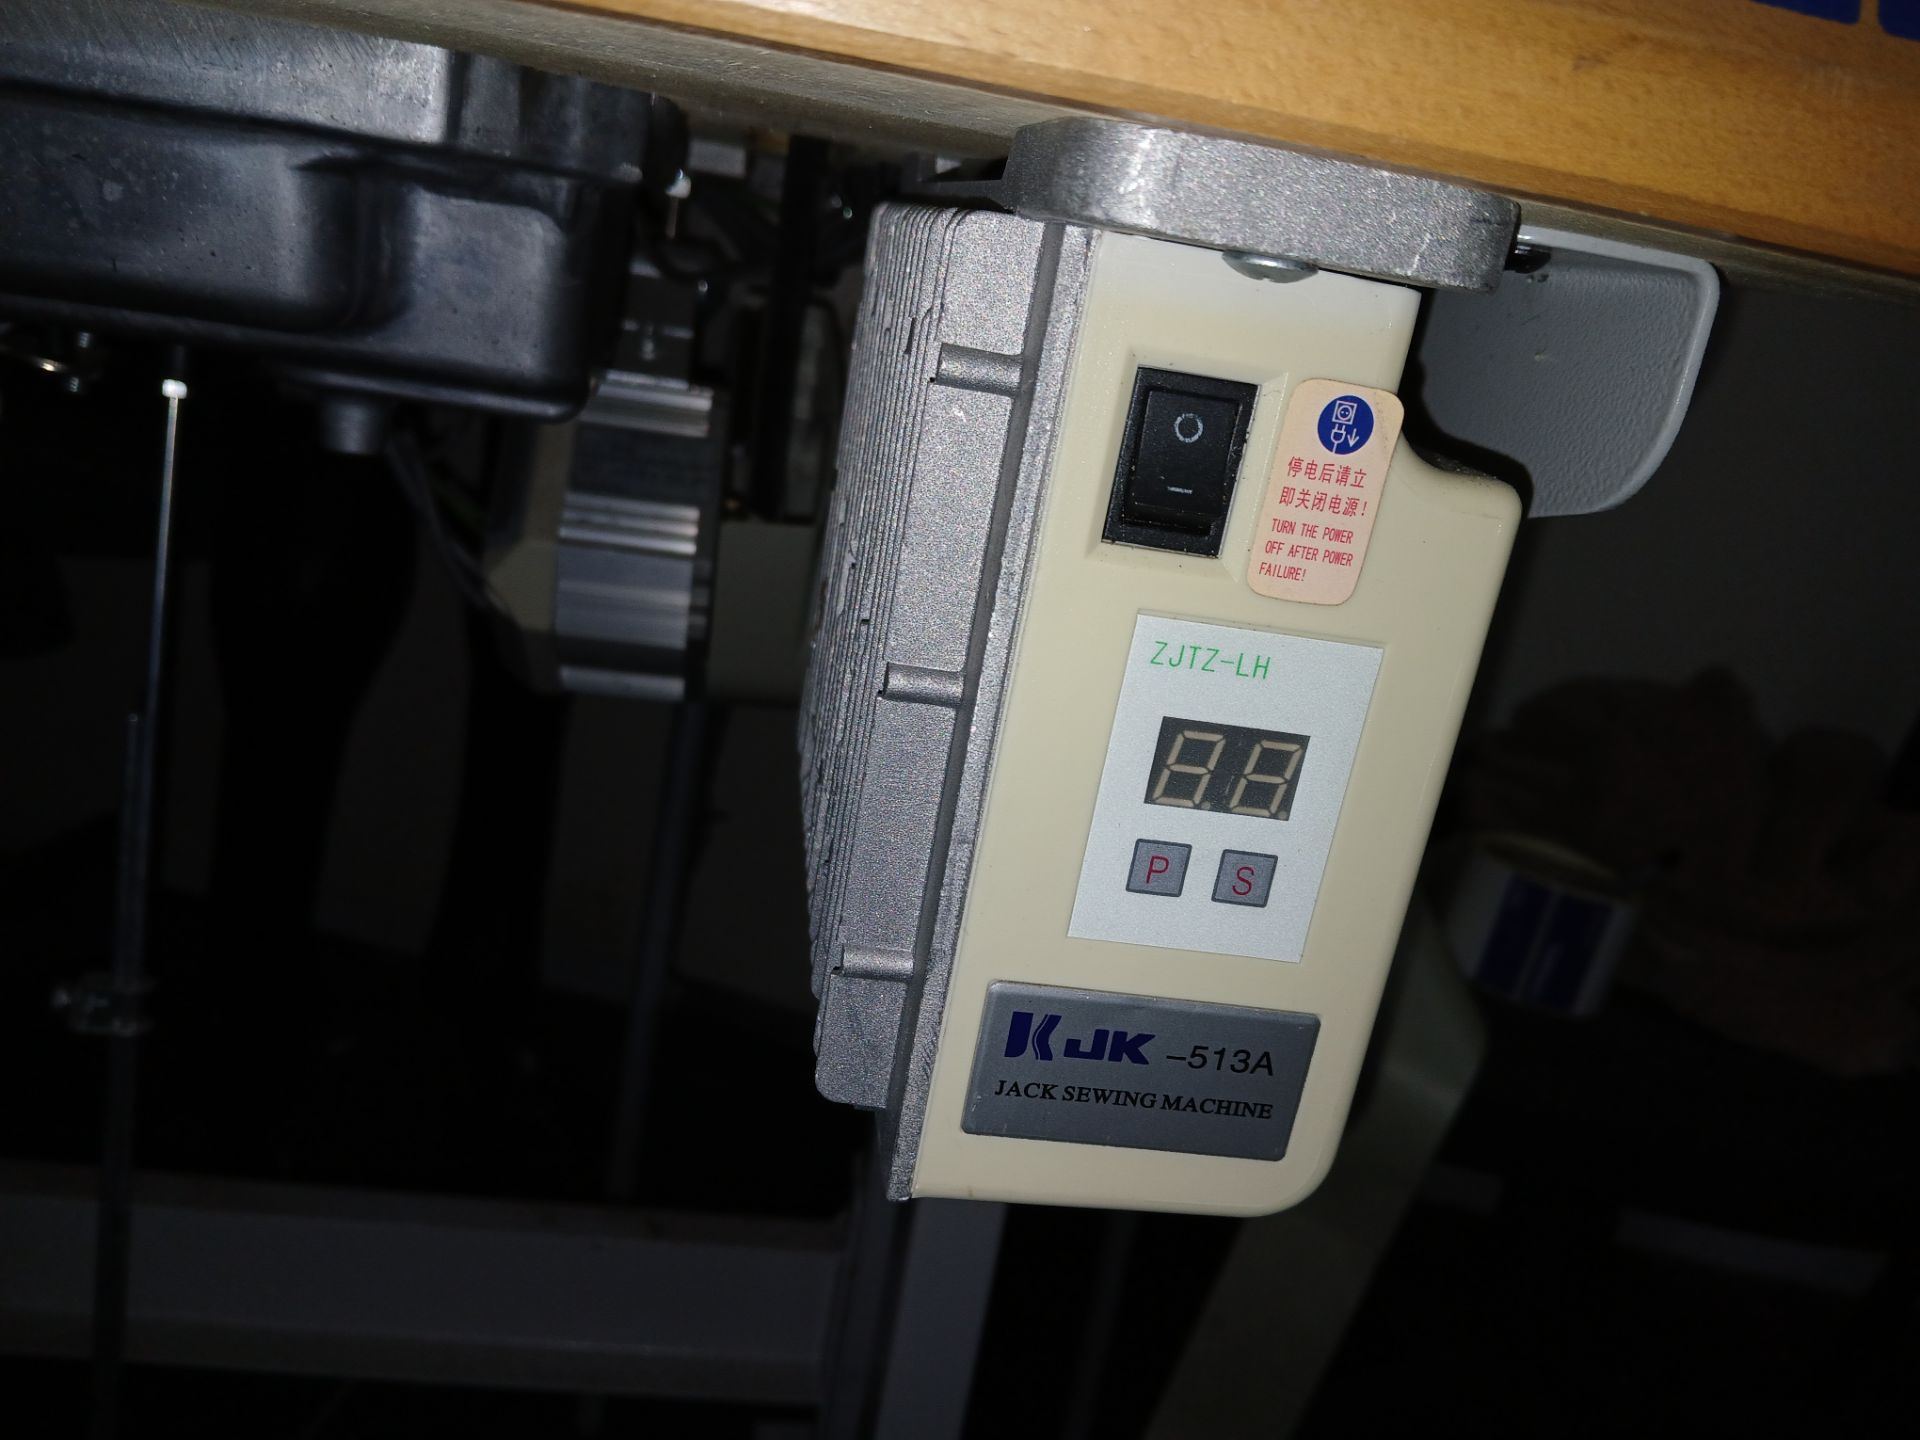 Juki DDL 800e sewing machine as lotted – not in use but understood to be in working order. Viewing - Image 4 of 4